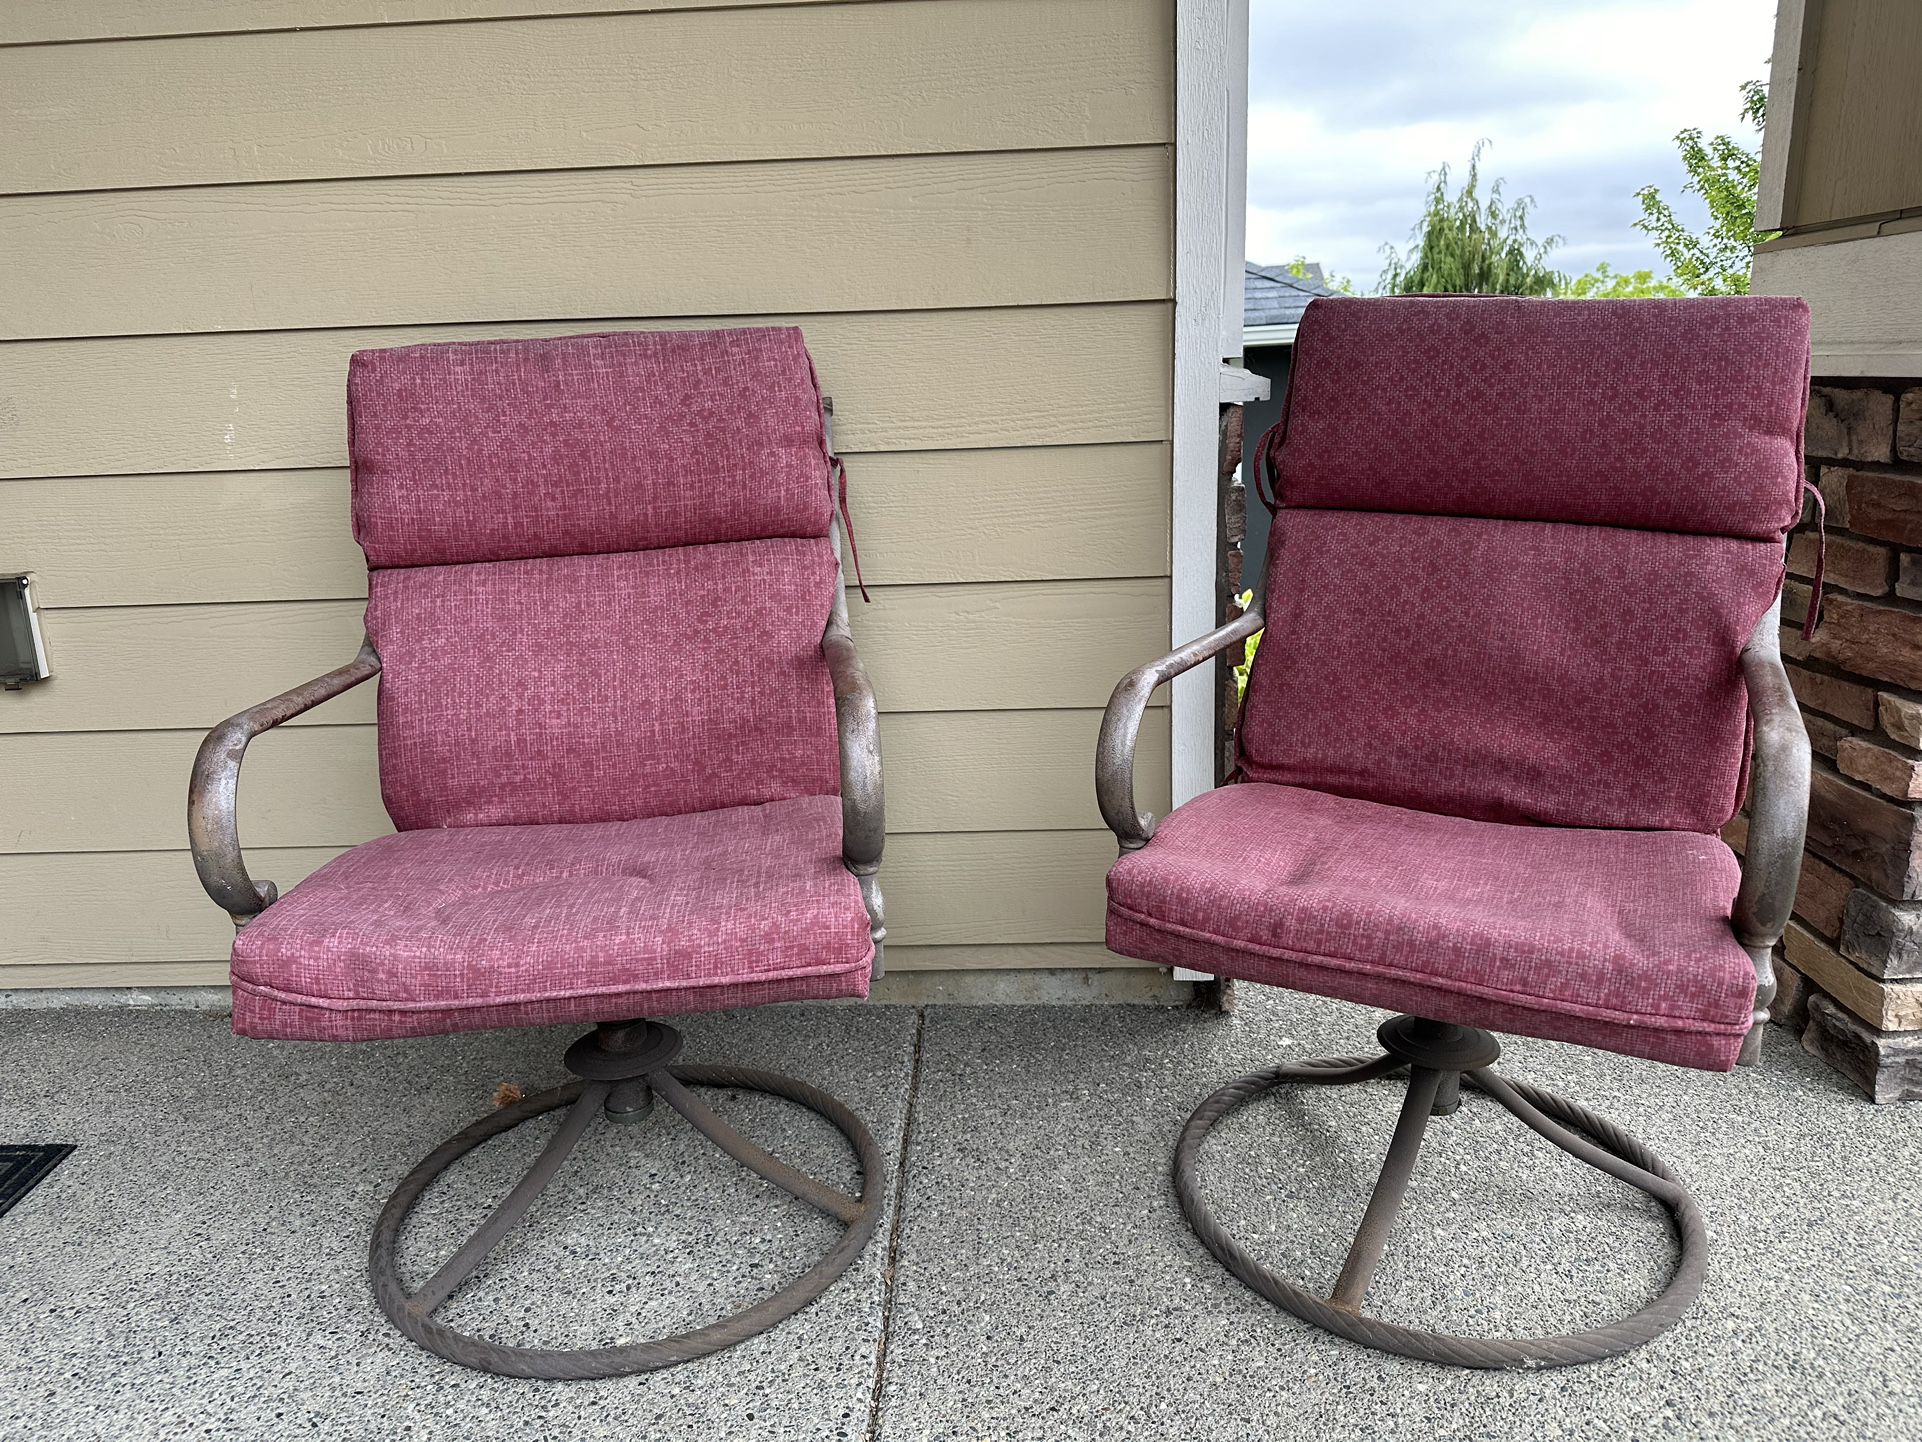 Pending Pick Up: Free Patio Chairs